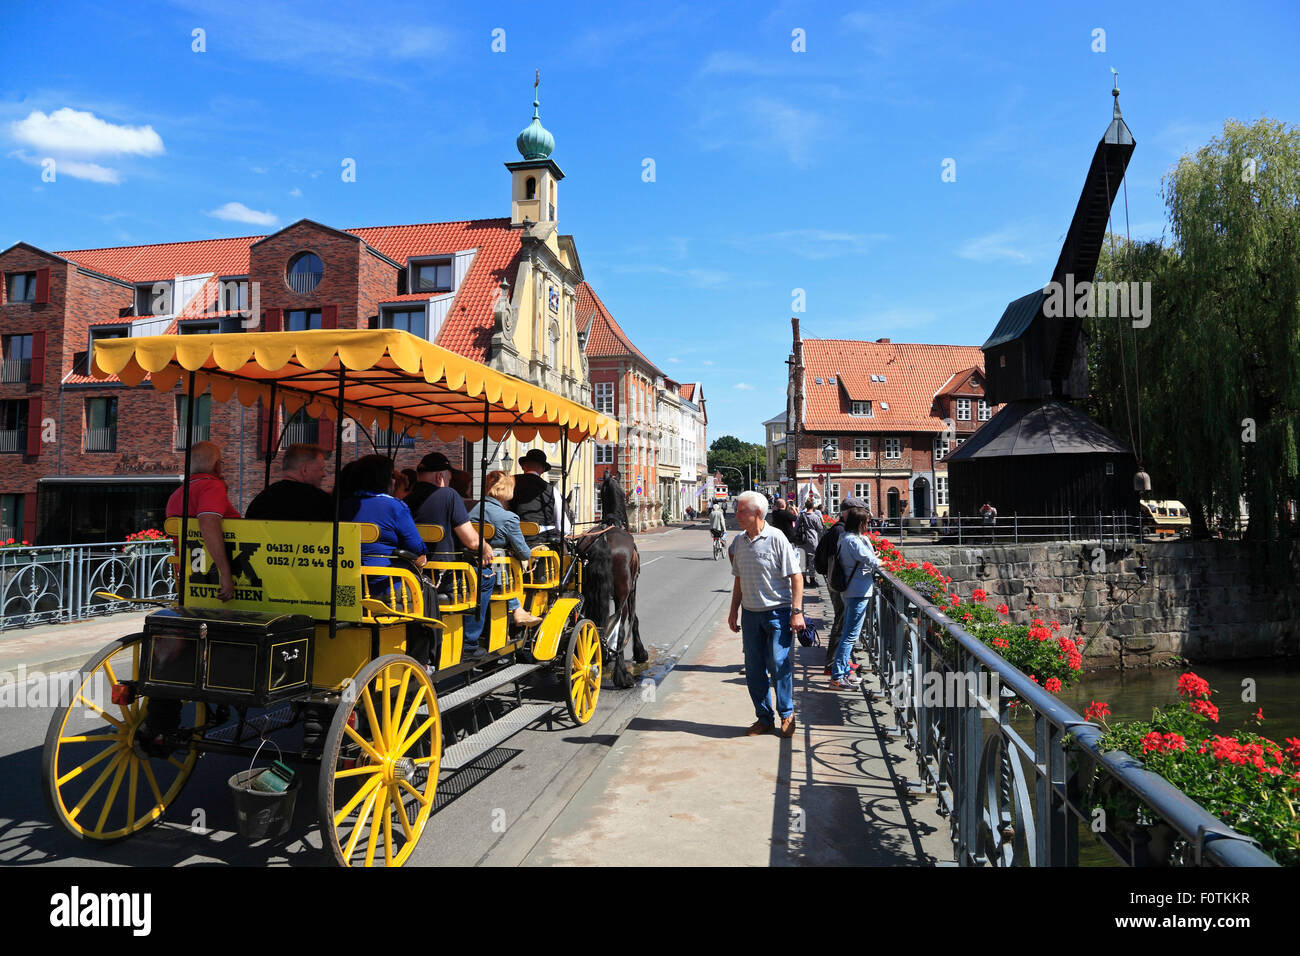 Sightseeing tour by carriage, old harbour quarter, Lueneburg, Lüneburg, Lower Saxony, Germany, Europe Stock Photo